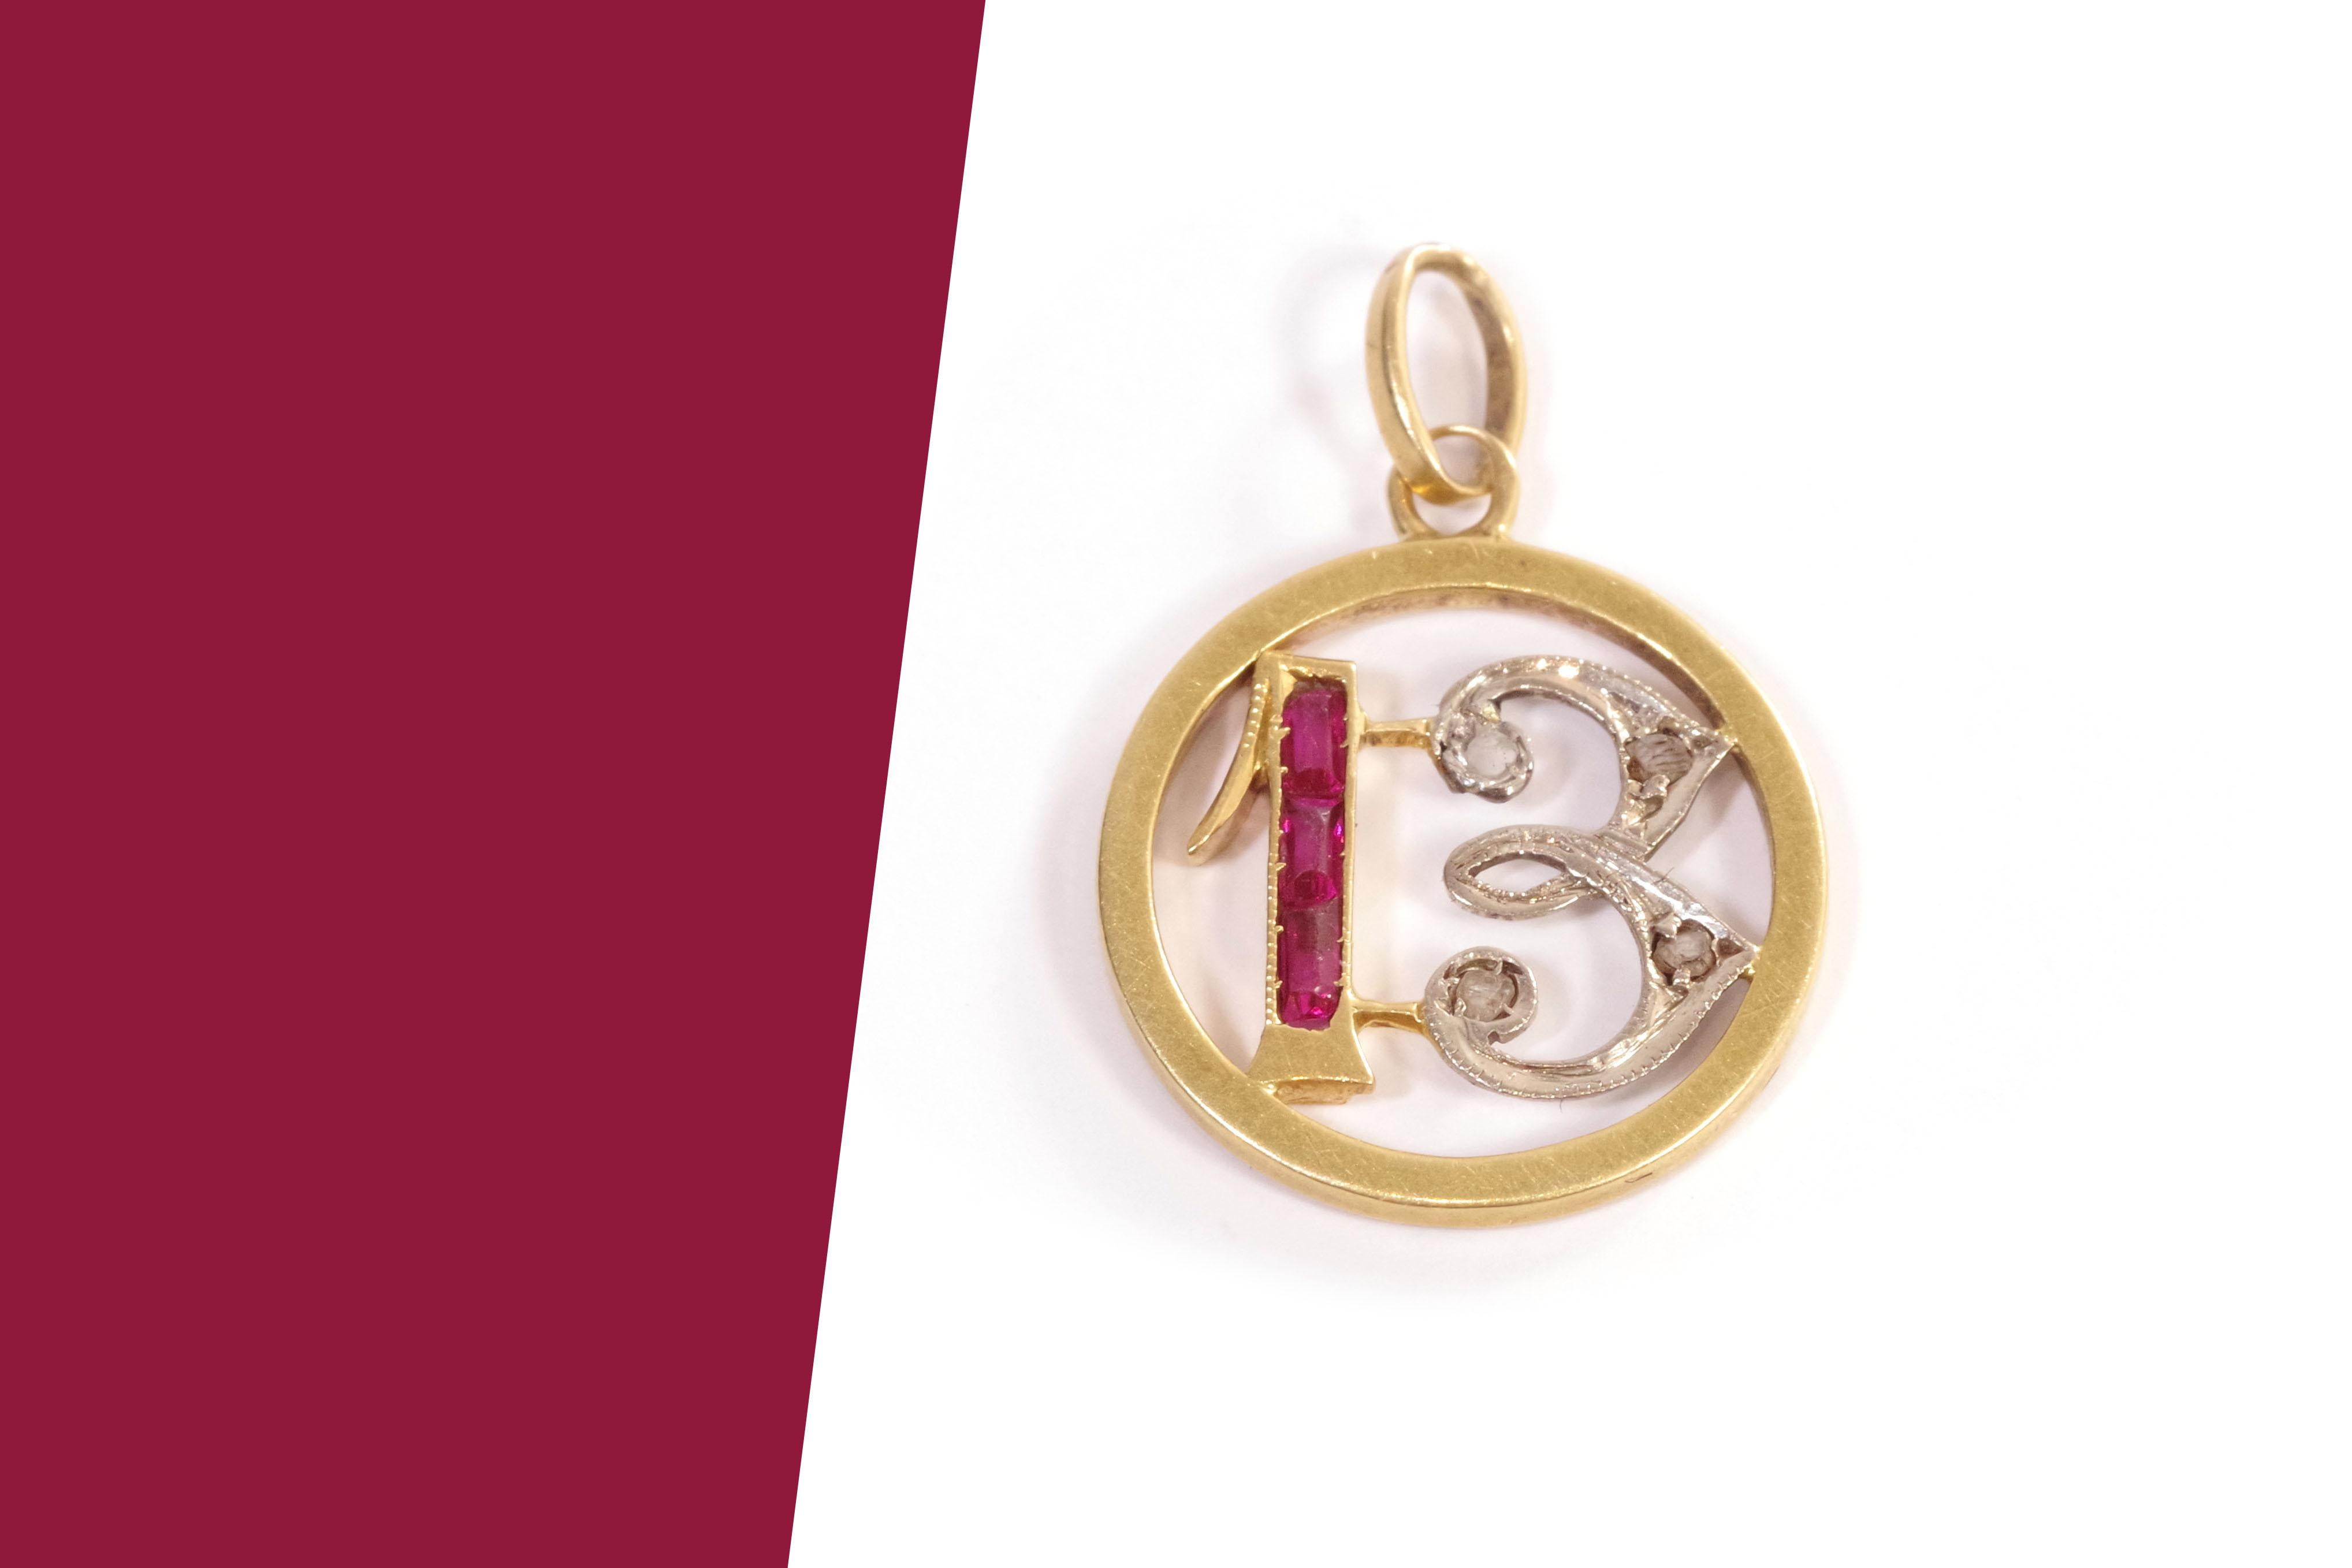 Art Deco Edwardian pendant 13 in 18-karat rose gold and platinum. Lucky charm pendant featuring the number 13 at its center, set with 3 synthetic rubies and 4 rose-cut diamonds. These small lucky charm medallions were fashionable in the early 20th